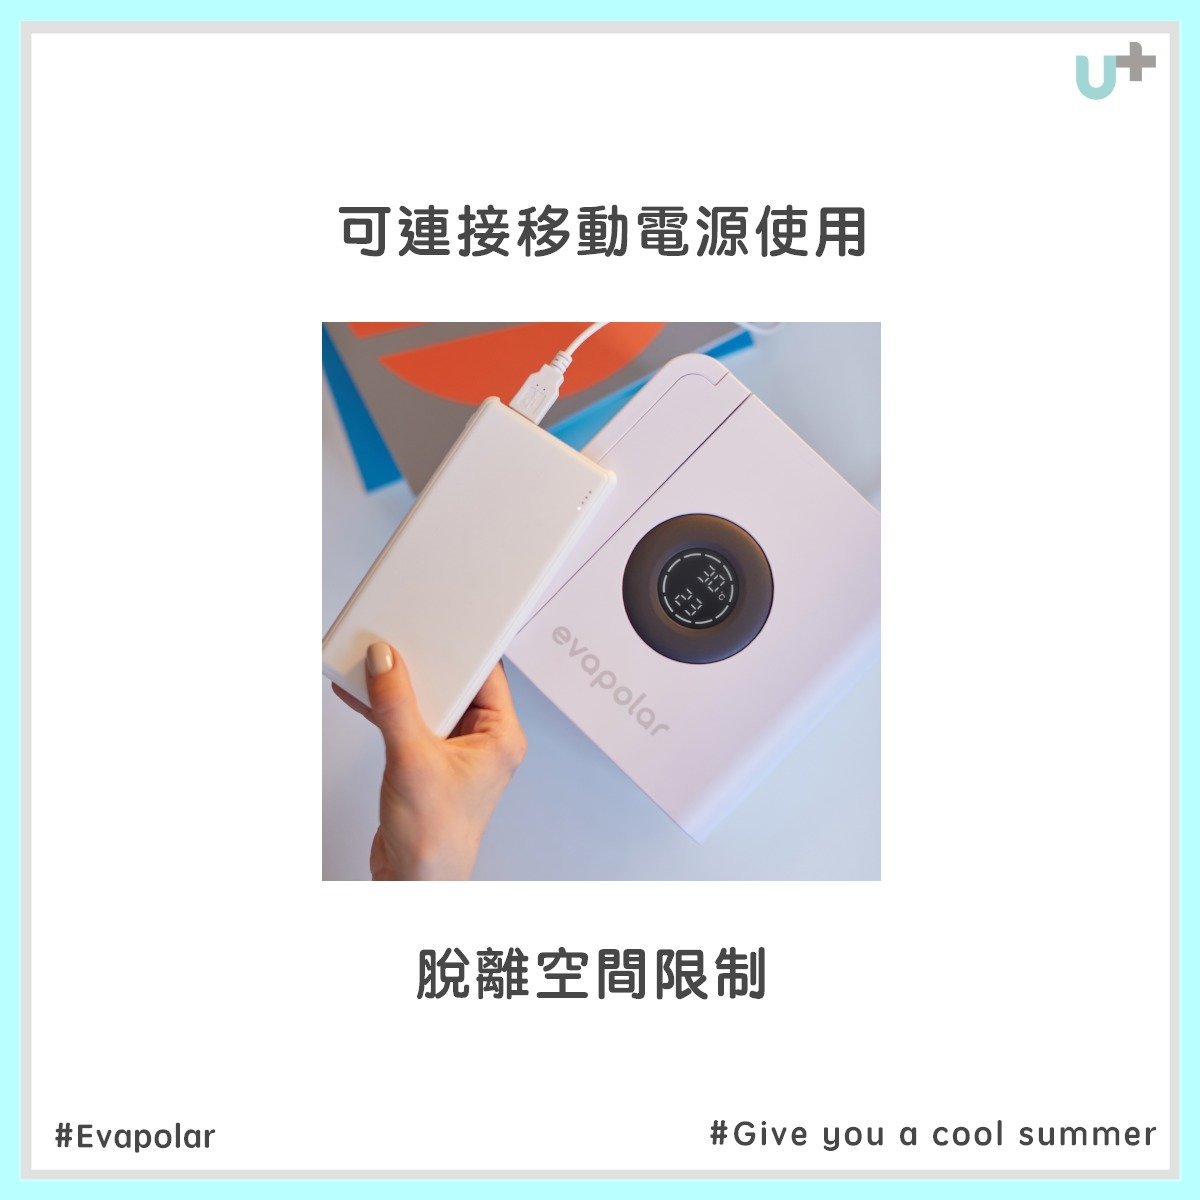 Evapolar - EvaLightPlus EV-1500 Small Mobile Air Conditioner 4th Generation - White [Licensed in Hong Kong]